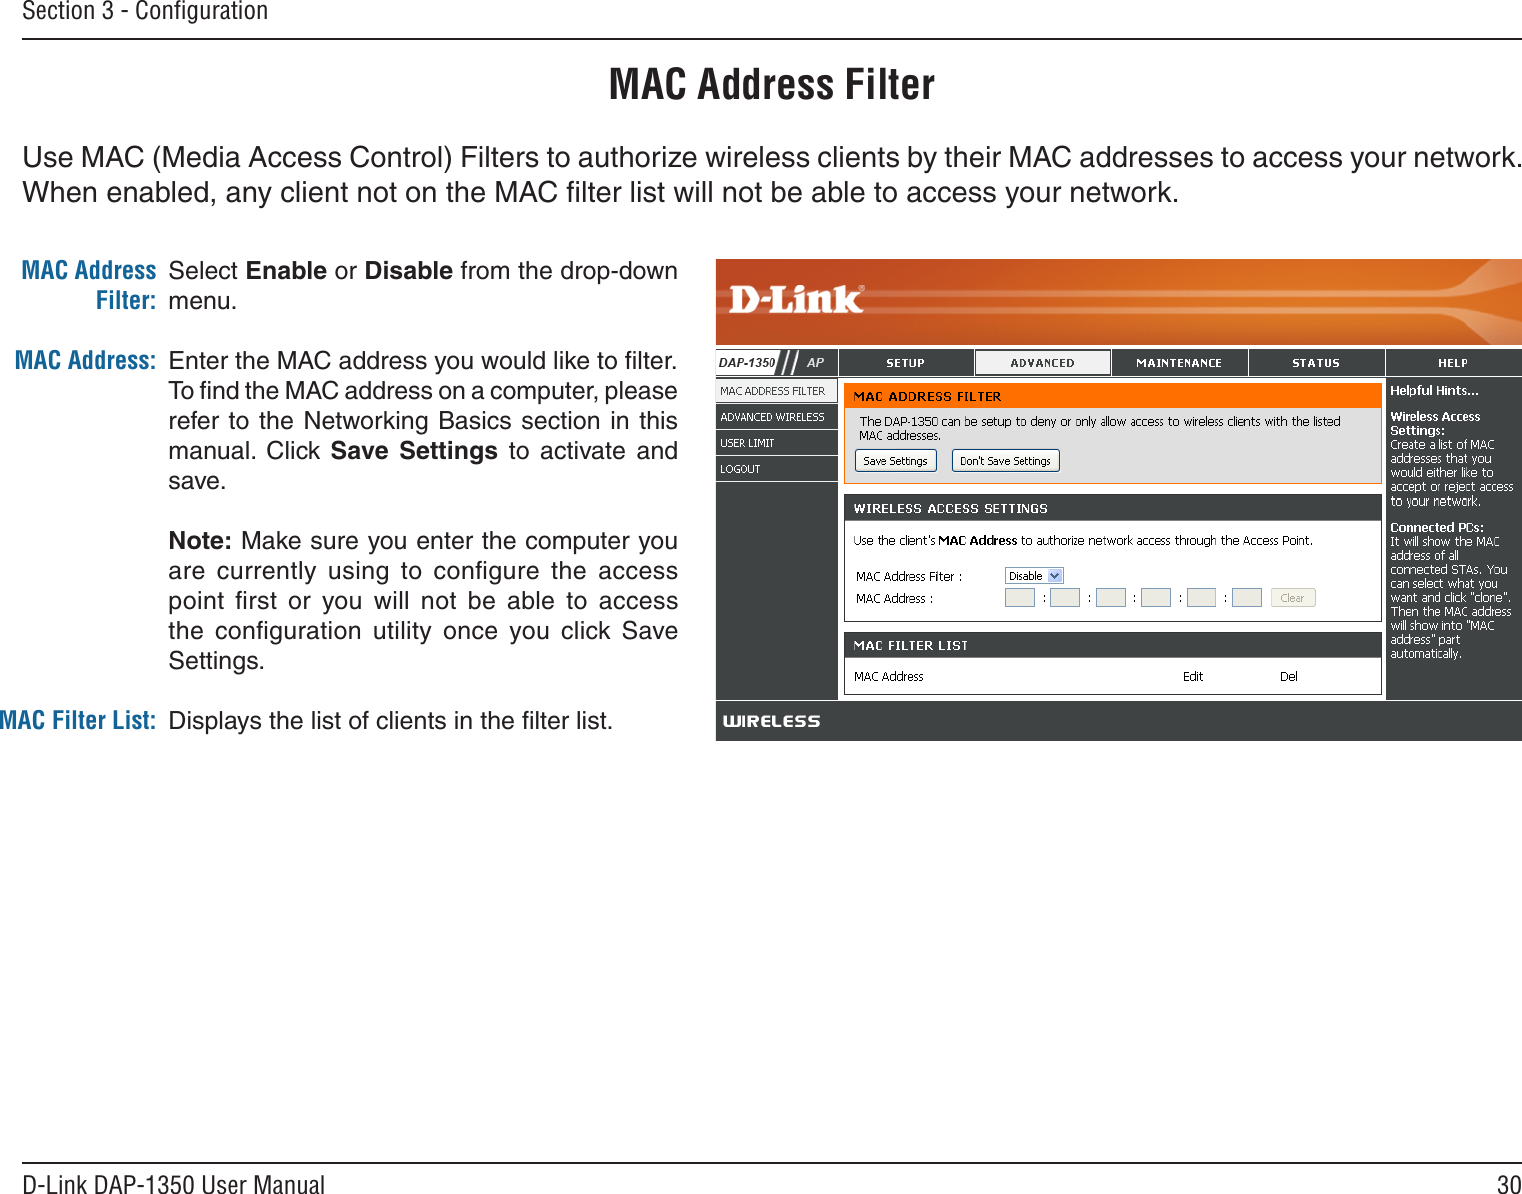 30D-Link DAP-1350 User ManualSection 3 - ConﬁgurationMAC Address FilterSelect Enable or Disable from the drop-down menu. Enter the MAC address you would like to ﬁlter.To ﬁnd the MAC address on a computer, please refer to the Networking Basics section in this manual.  Click Save  Settings  to  activate  and save.Note: Make sure you enter the computer you are  currently  using  to  conﬁgure  the  access point  ﬁrst  or  you will  not  be  able  to  access the  conﬁguration  utility  once  you  click Save Settings.Displays the list of clients in the ﬁlter list.MAC Address Filter:MAC Address:MAC Filter List:Use MAC (Media Access Control) Filters to authorize wireless clients by their MAC addresses to access your network. When enabled, any client not on the MAC ﬁlter list will not be able to access your network.